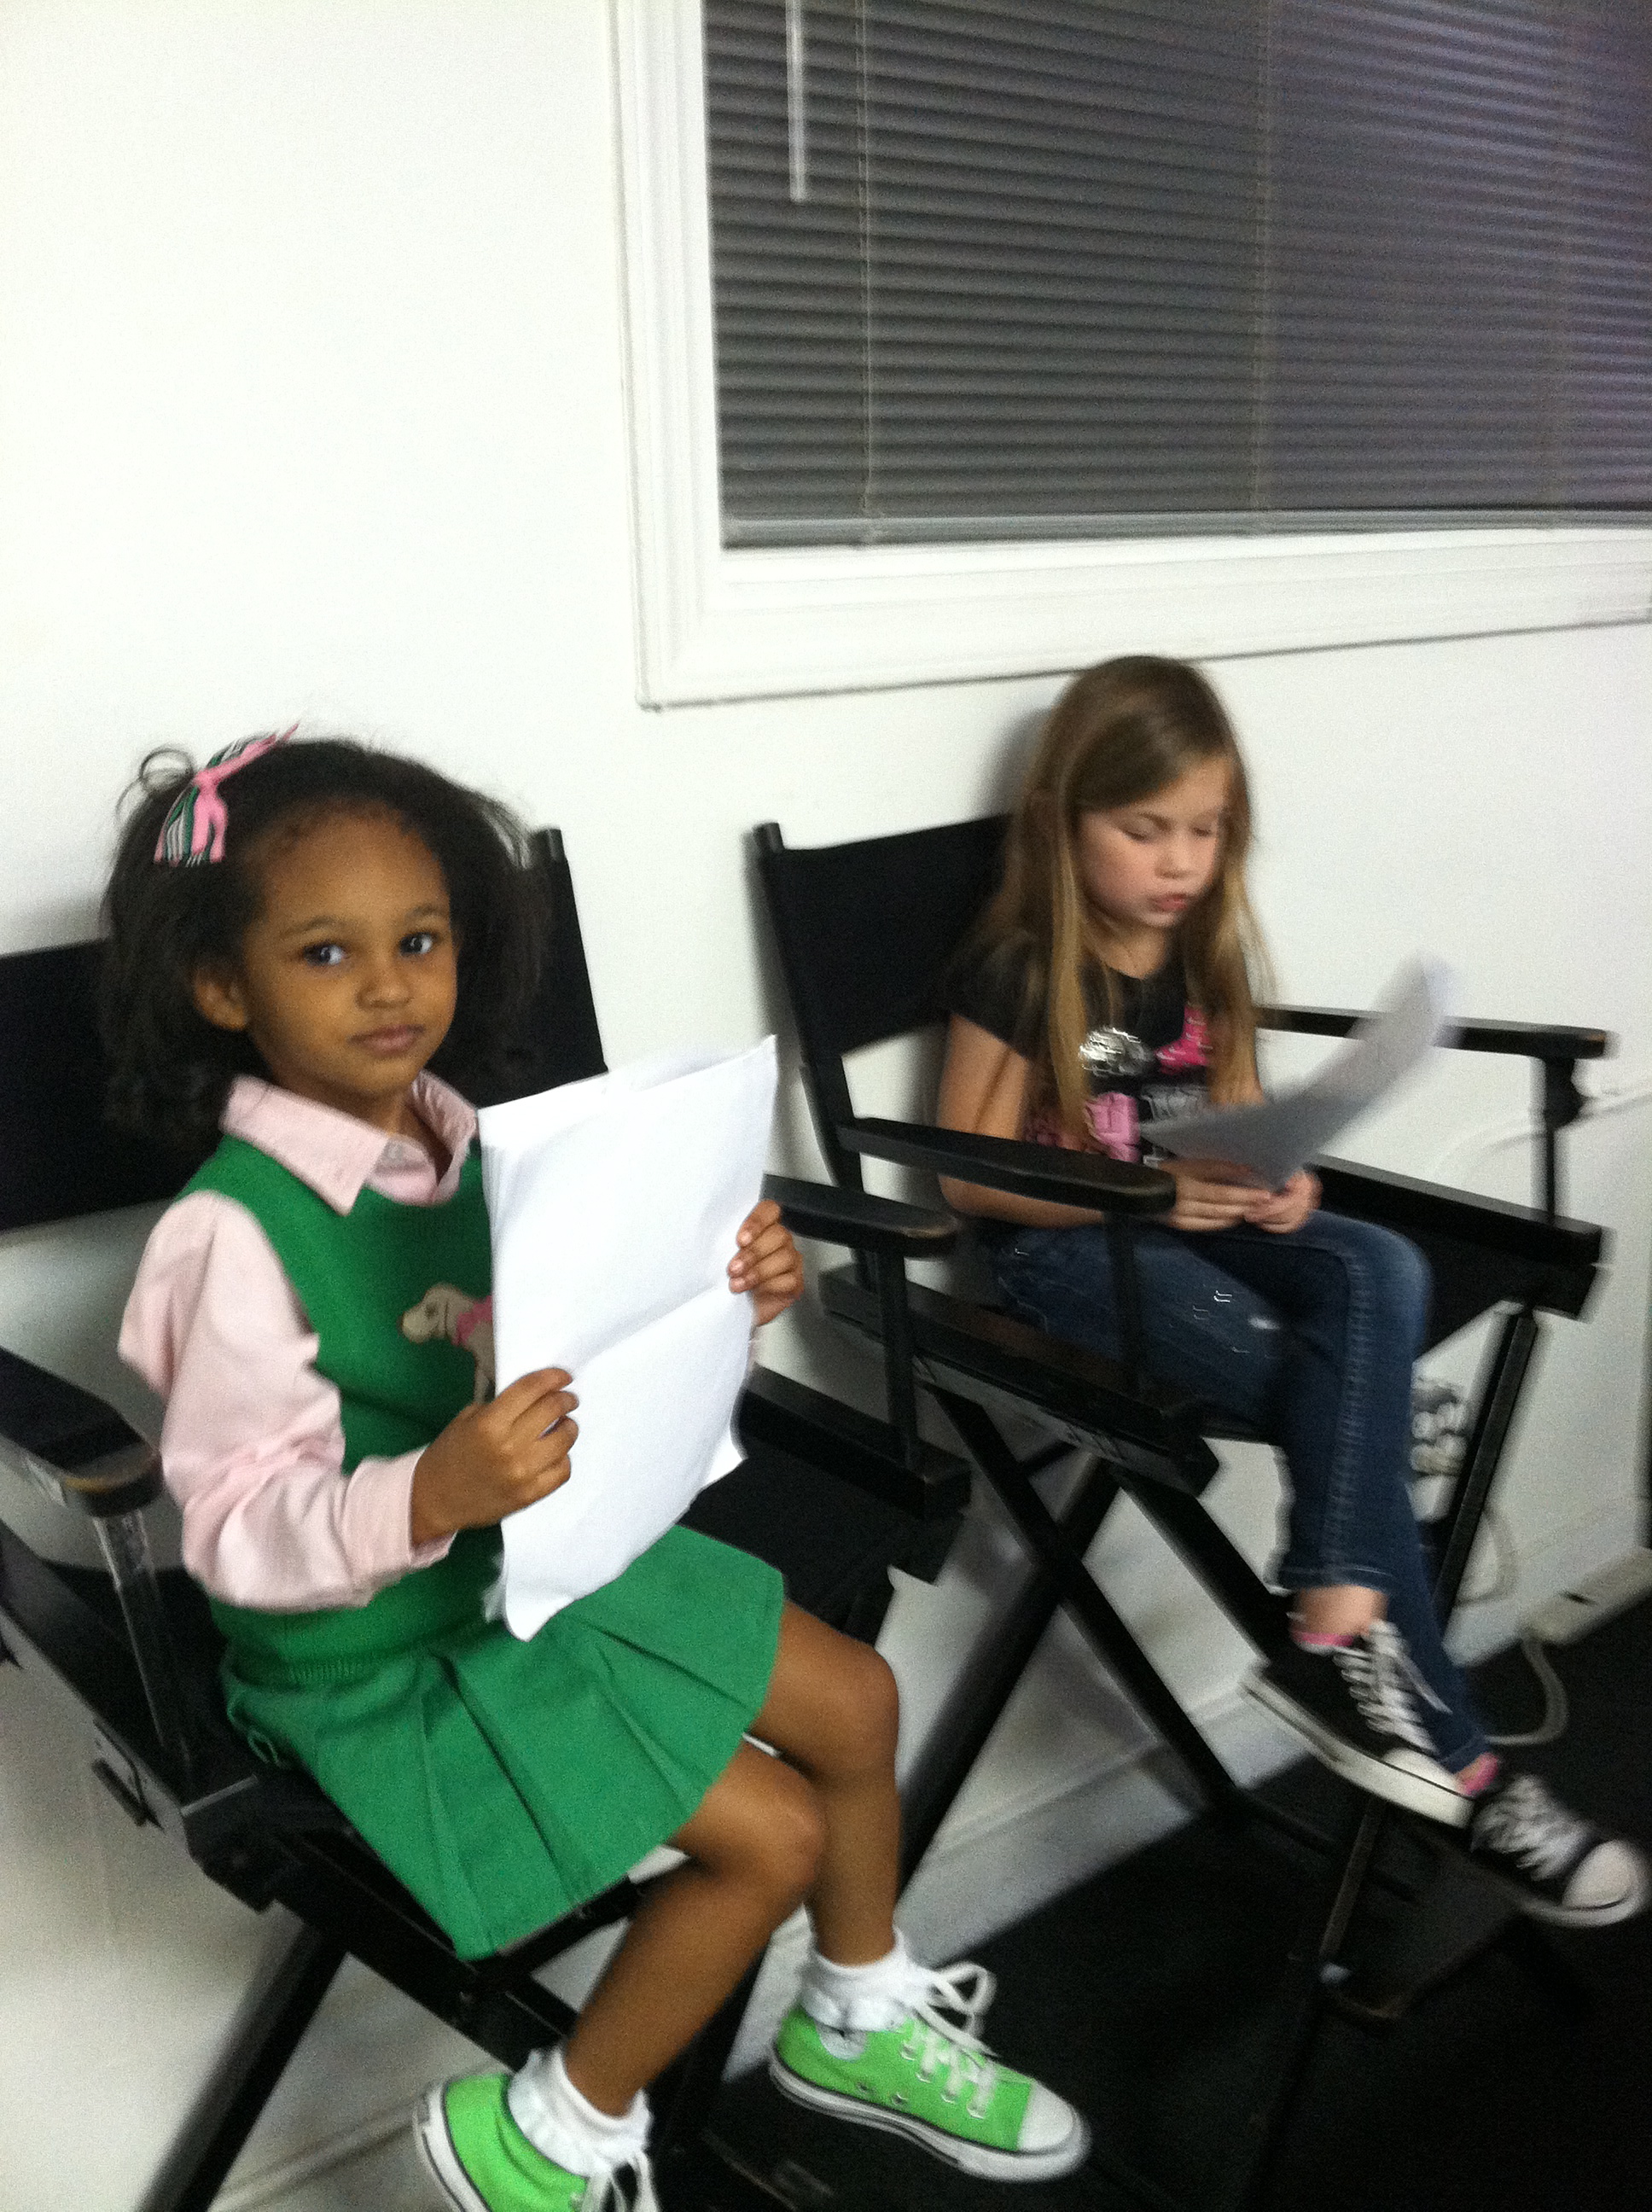 ON THE SET BOOK VIDEO (NERDS AND BULLIES)